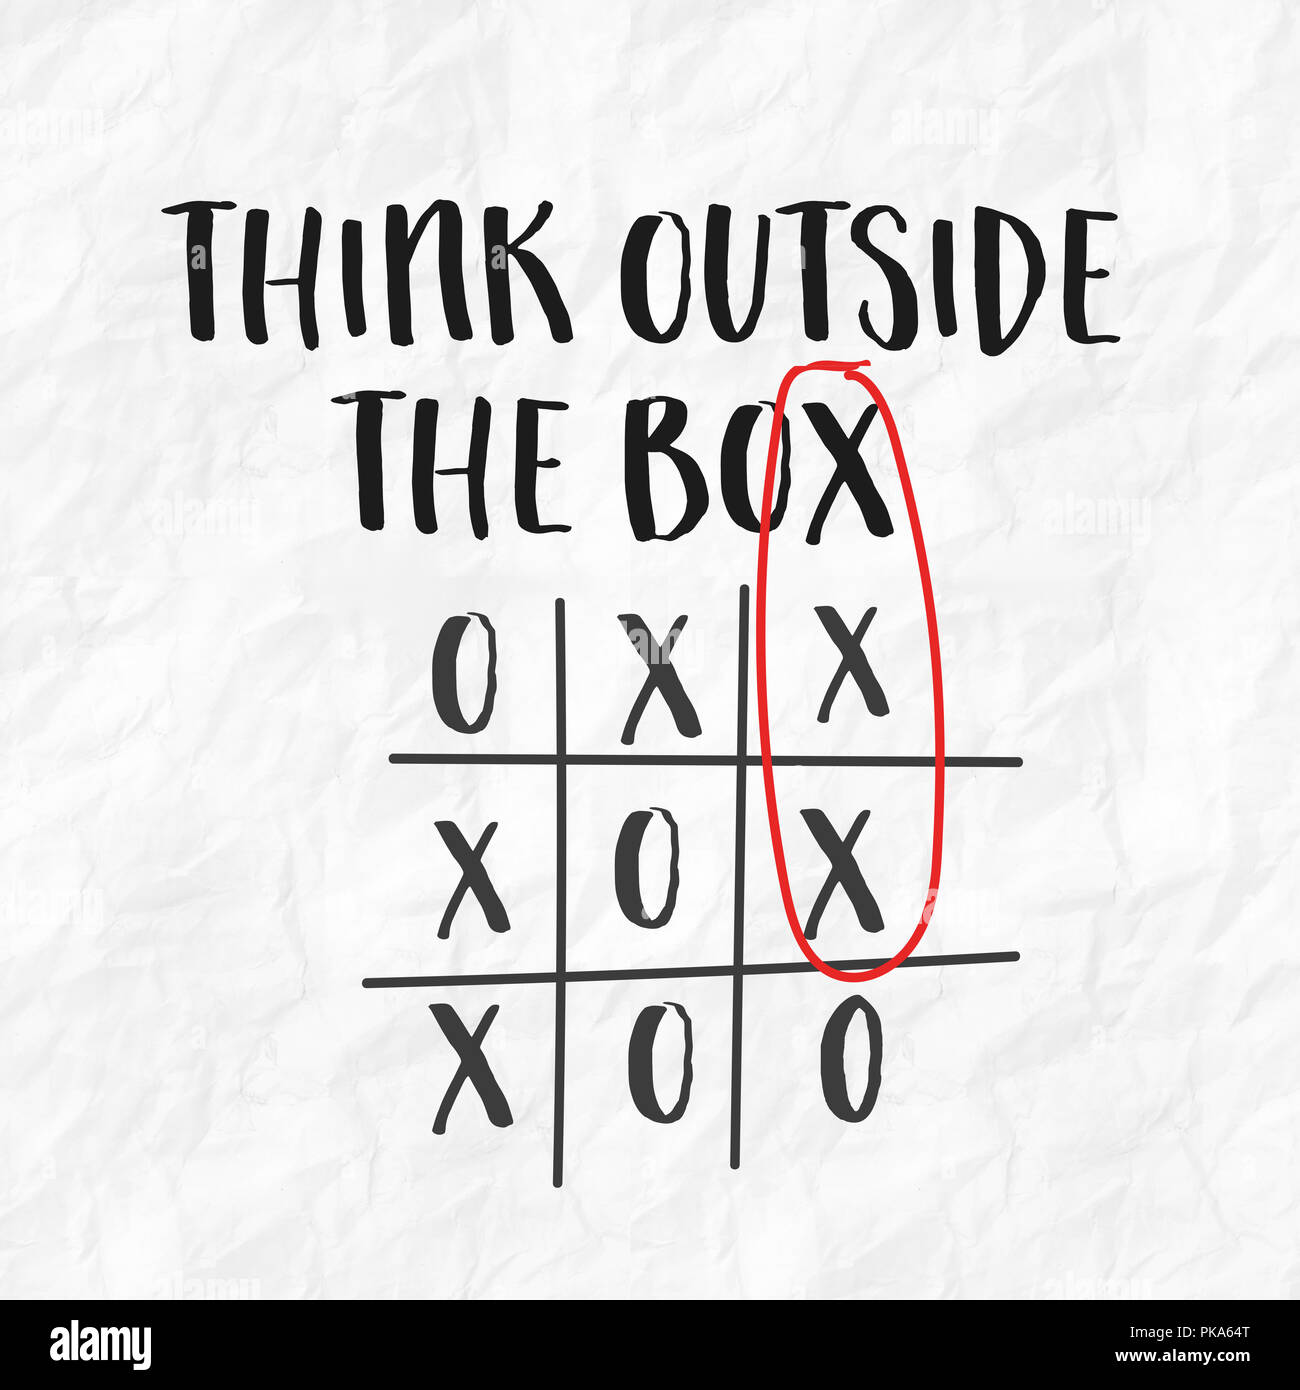 Think outside the box tic tac toe game text Stock Photo - Alamy